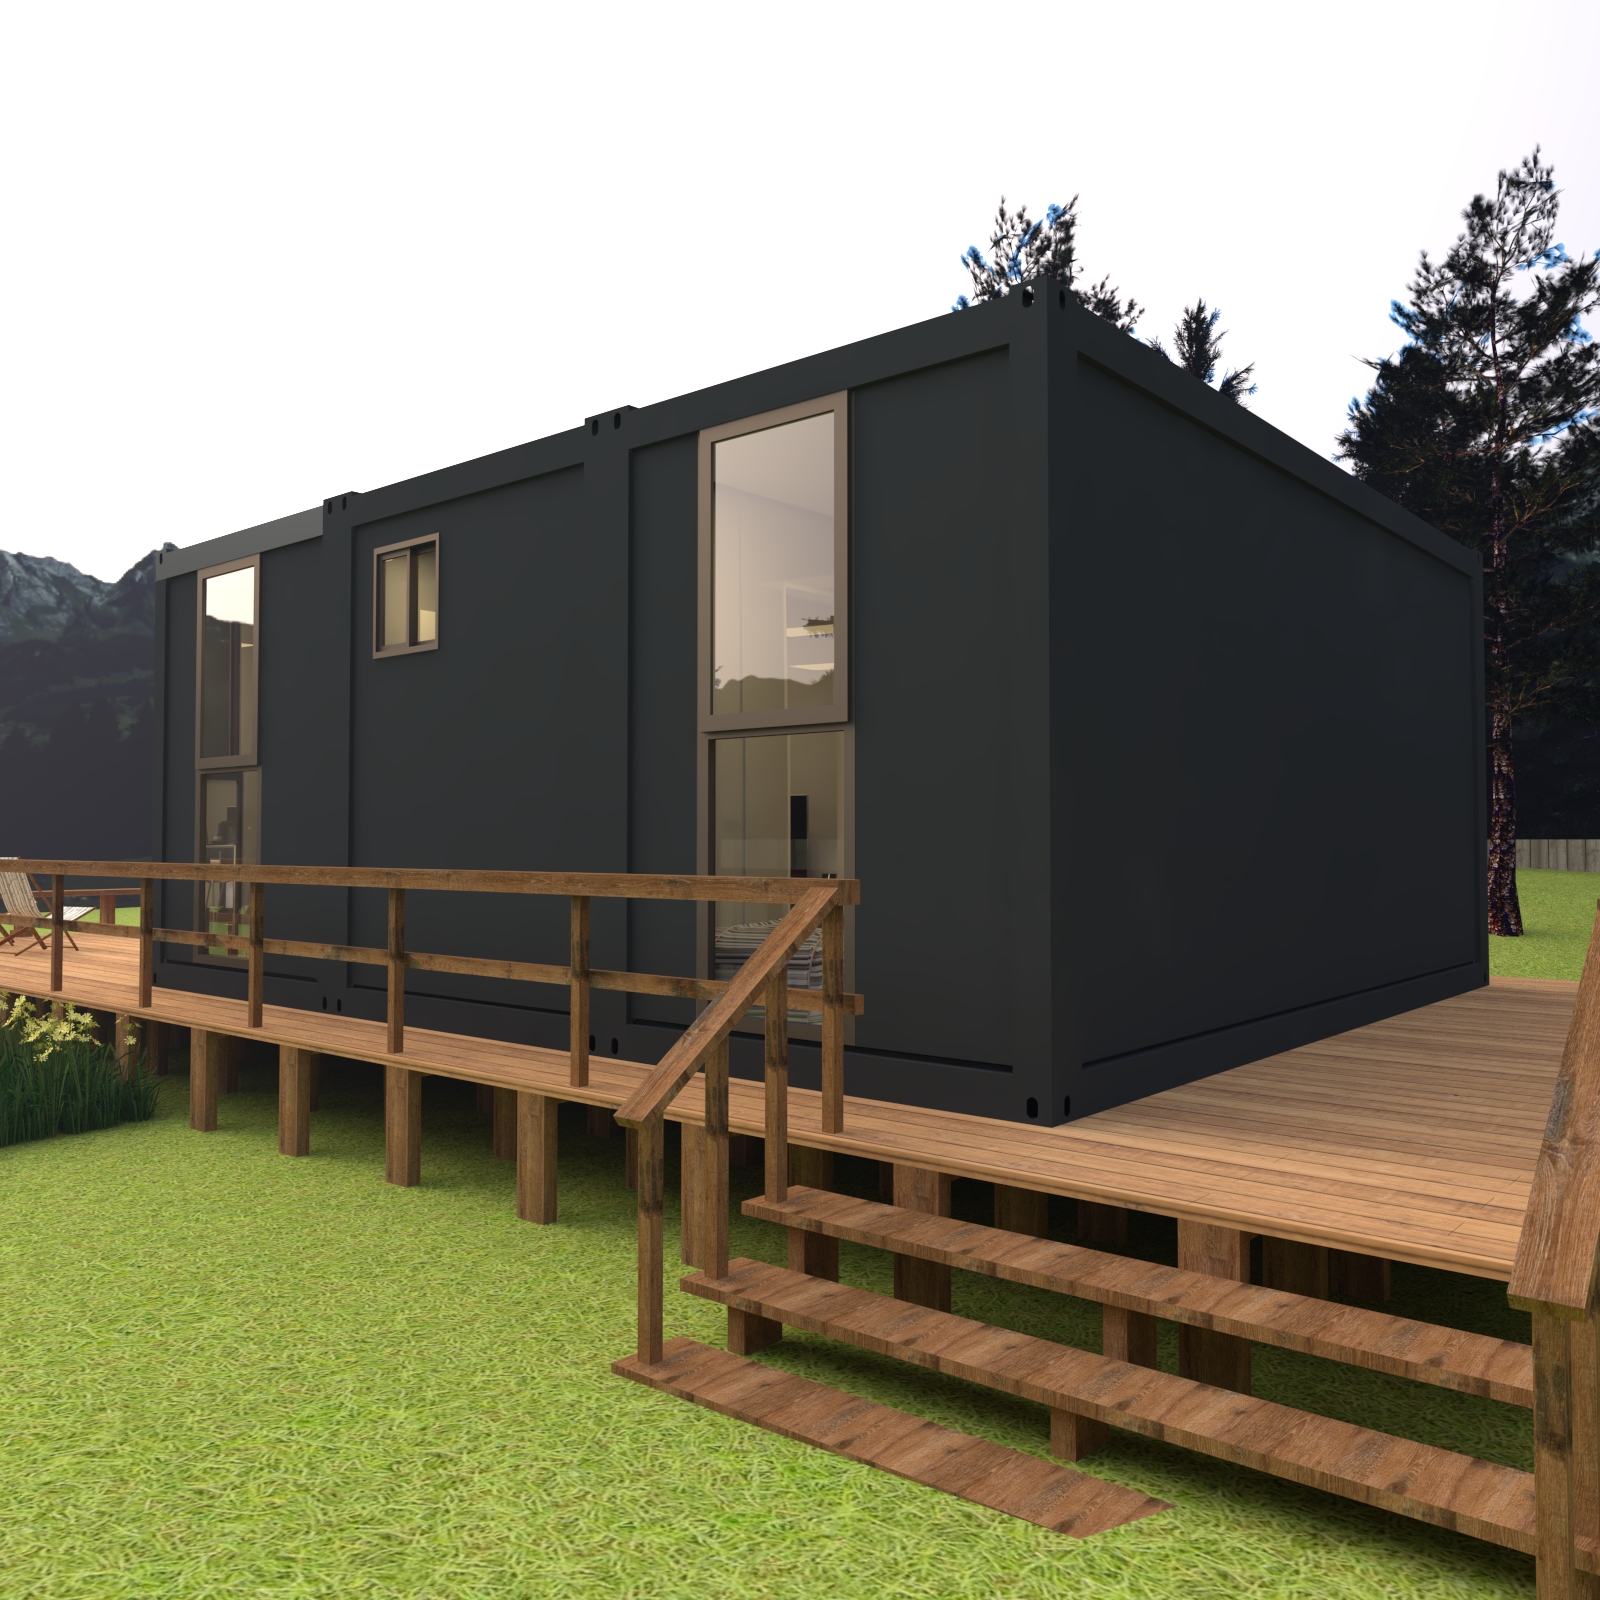 Prefabricated Modular Tiny Houses For Sale Modern Design Luxurious Container Home Prefab Houses